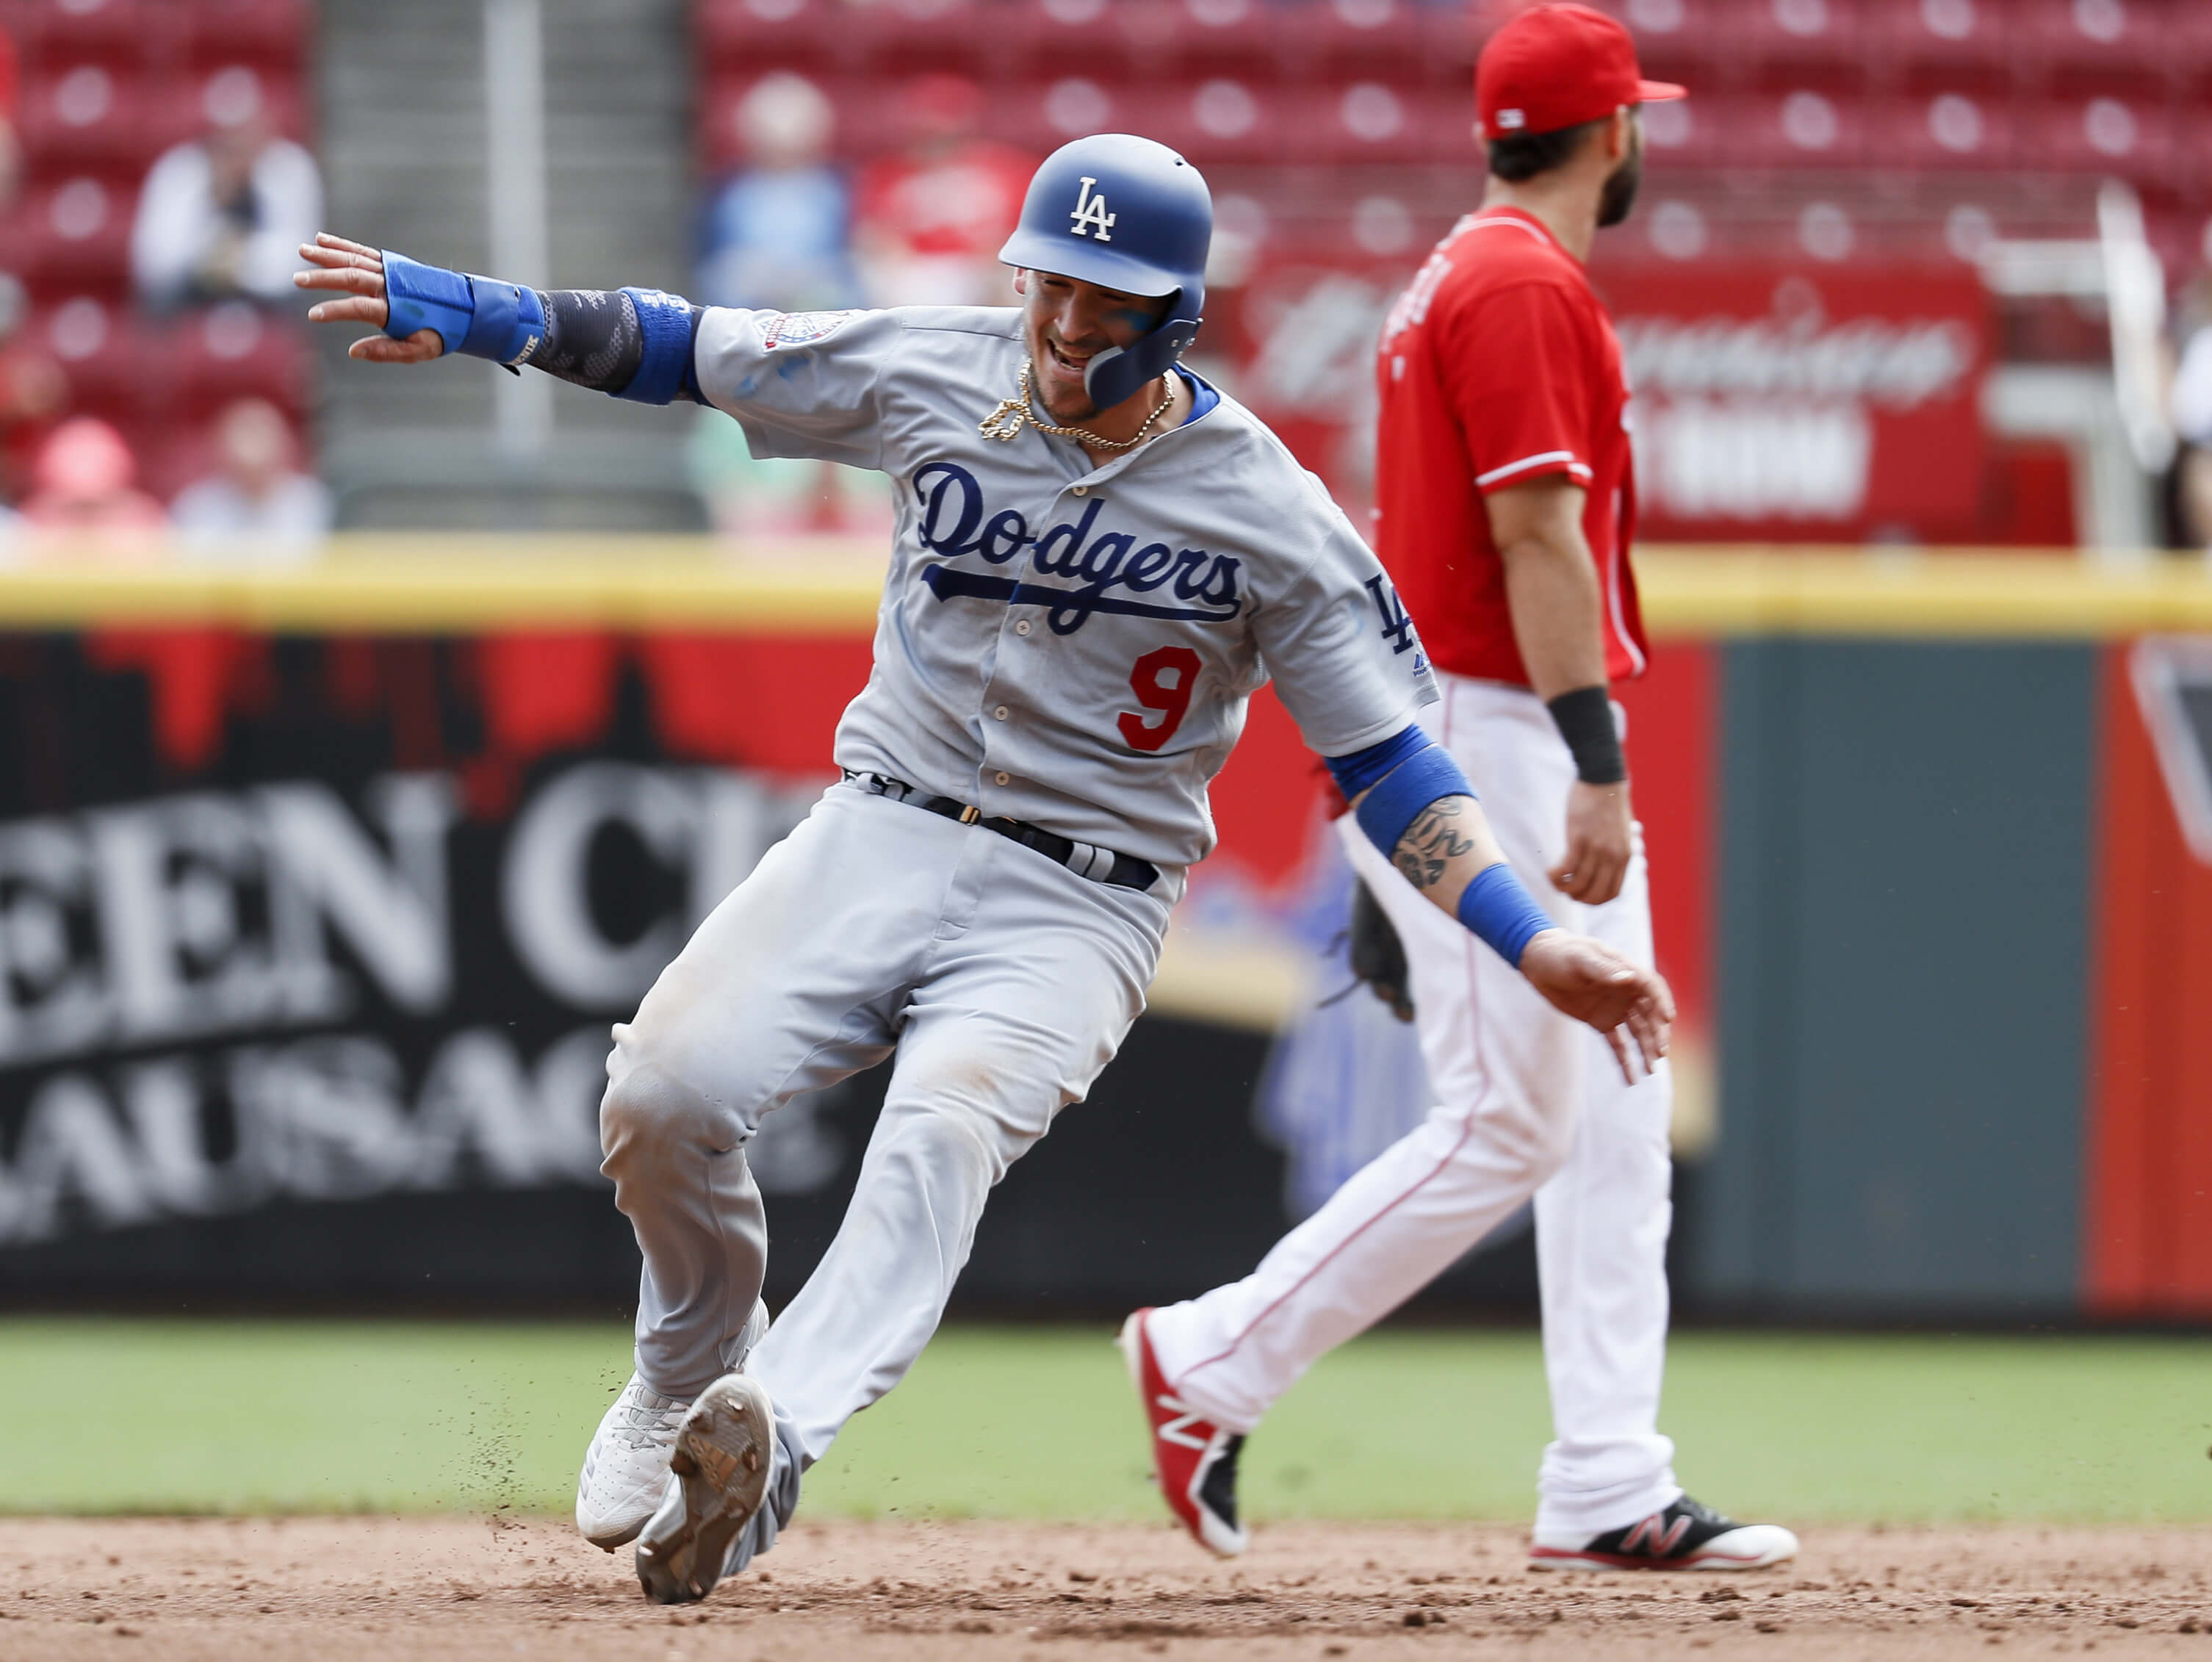 Yasmani Grandal advances to second on an error during the Los Angeles Dodgers' Sept. 12 game against the Cincinnati Reds.